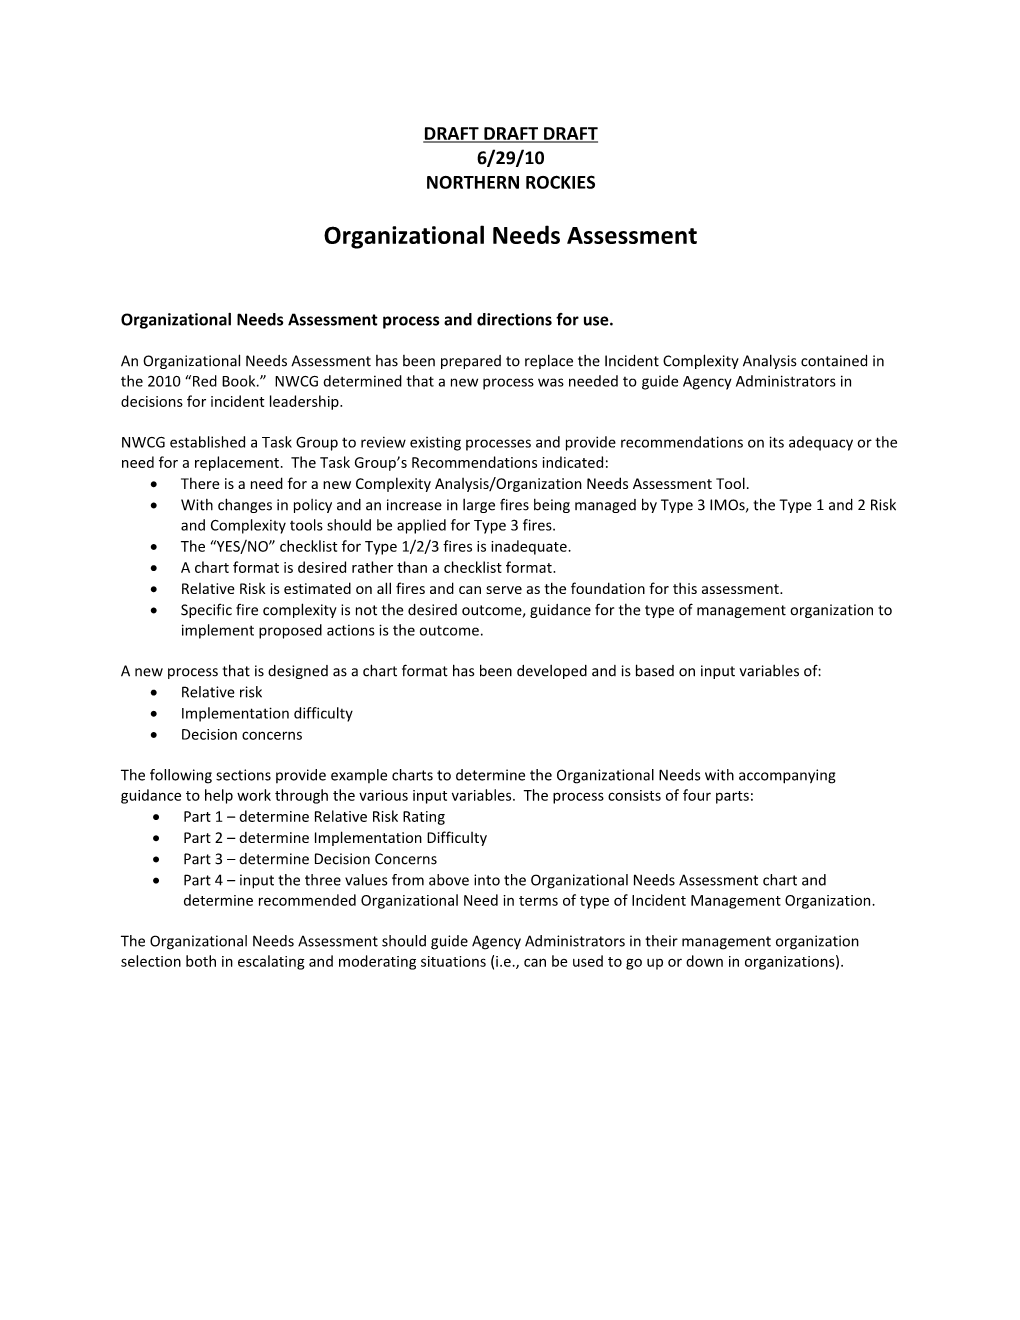 Organizational Needs Assessment Process and Directions for Use